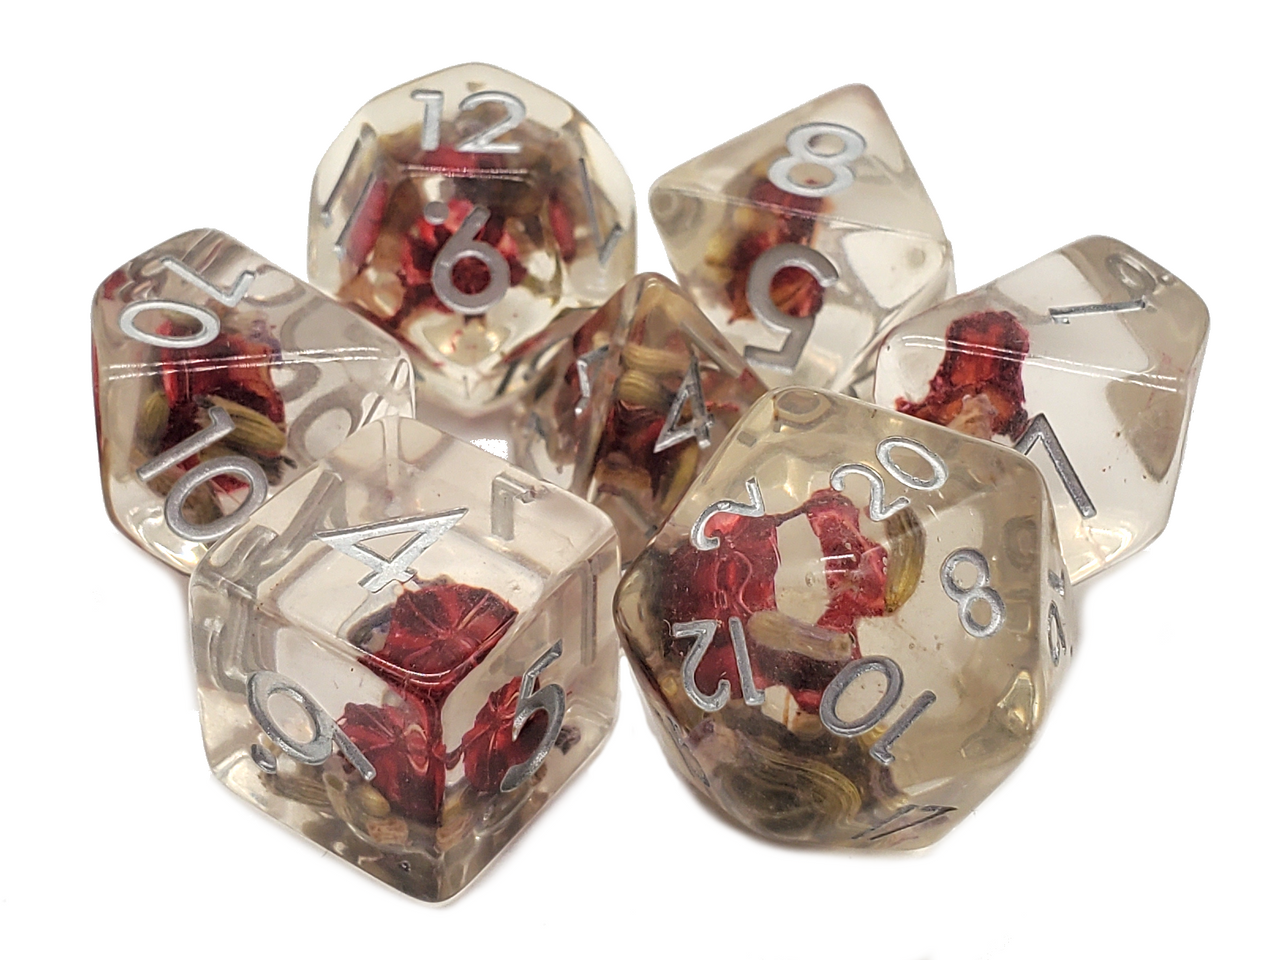 Old School 7 Piece Dnd RPG Dice Set Infused - Red Flower - New